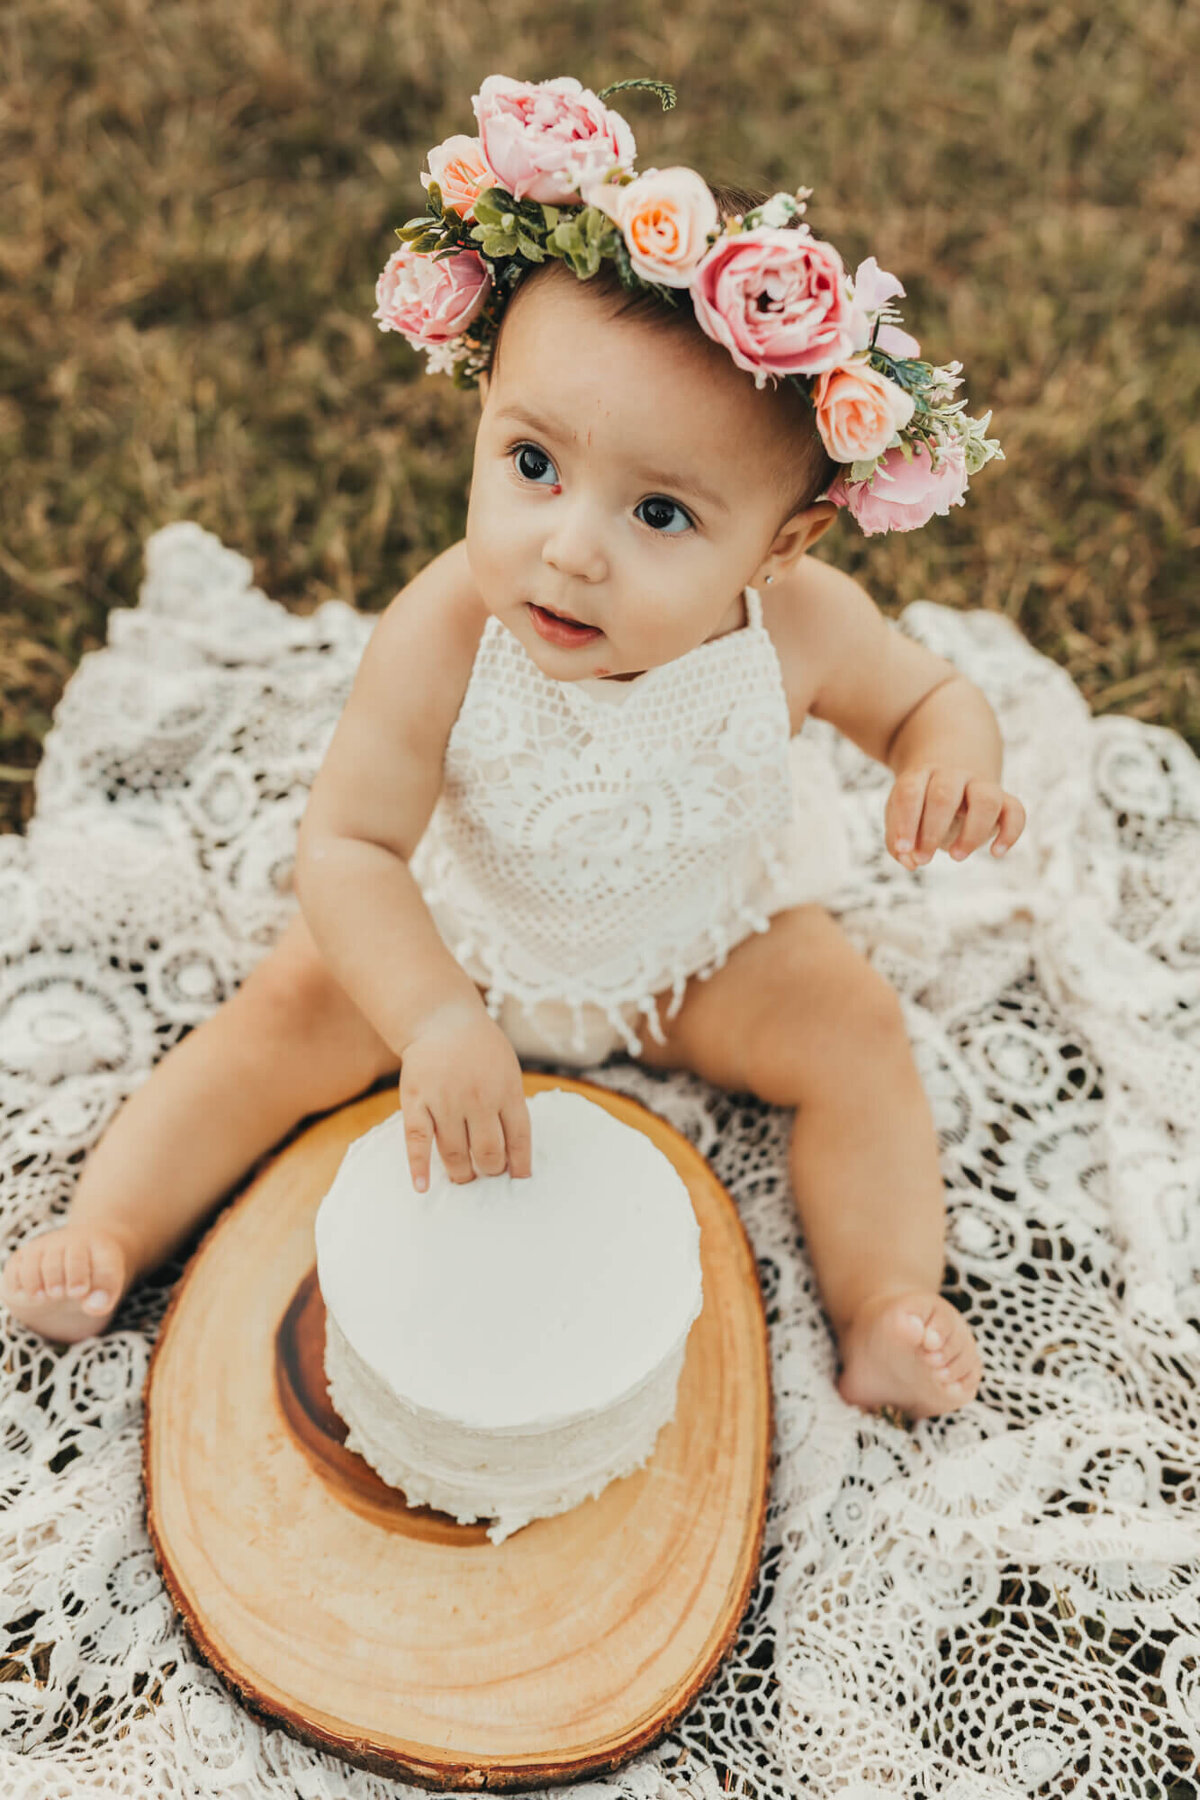 celebrating her birthday, little girl wears white romper and digs into cake.